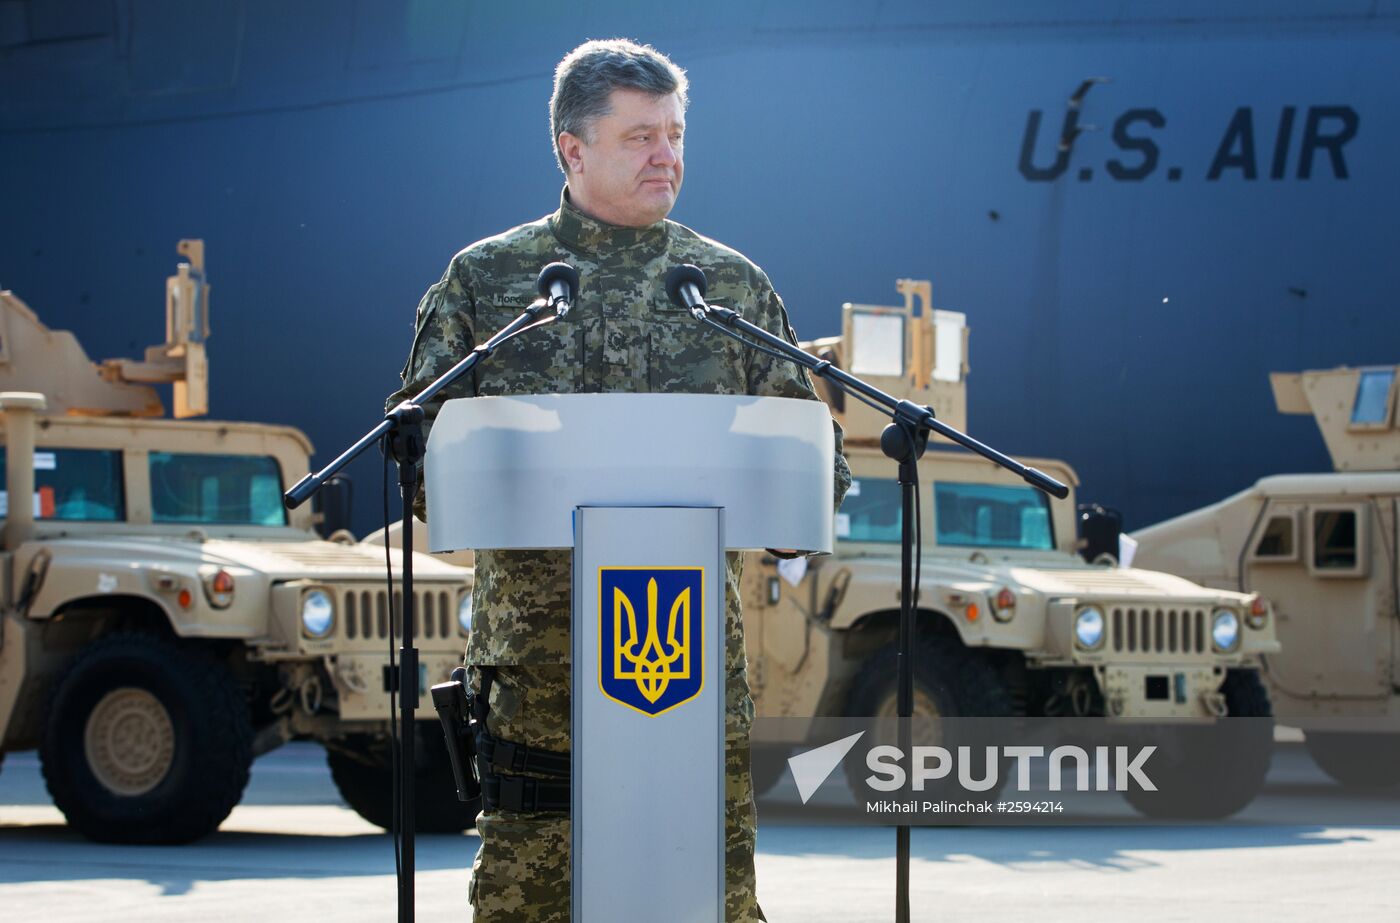 Ukrainian president Poroshenko receives the first US aircraft with armored vehicles